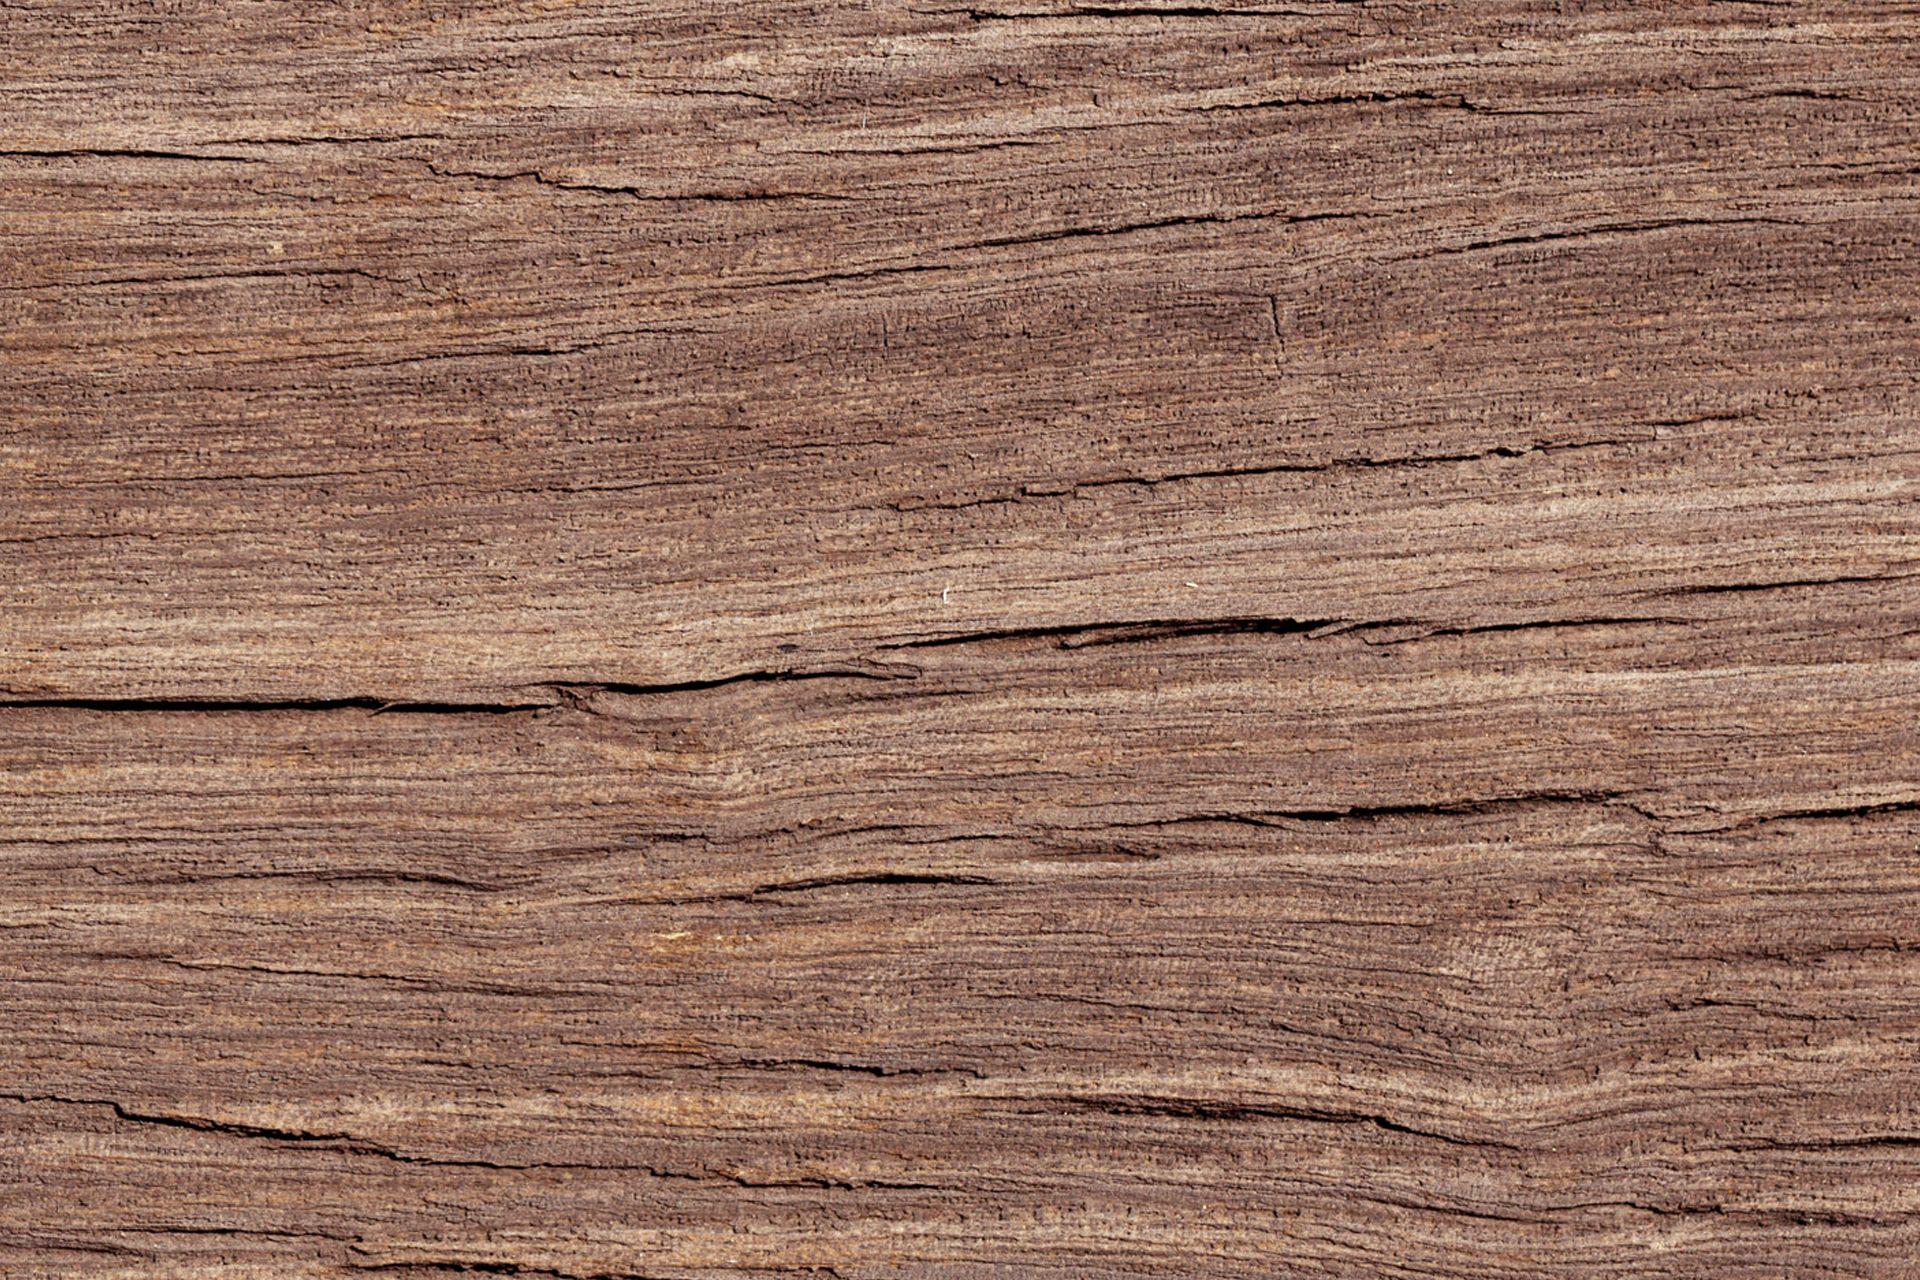 Free HD Wood Texture Widescreen Download. Free Background Wood